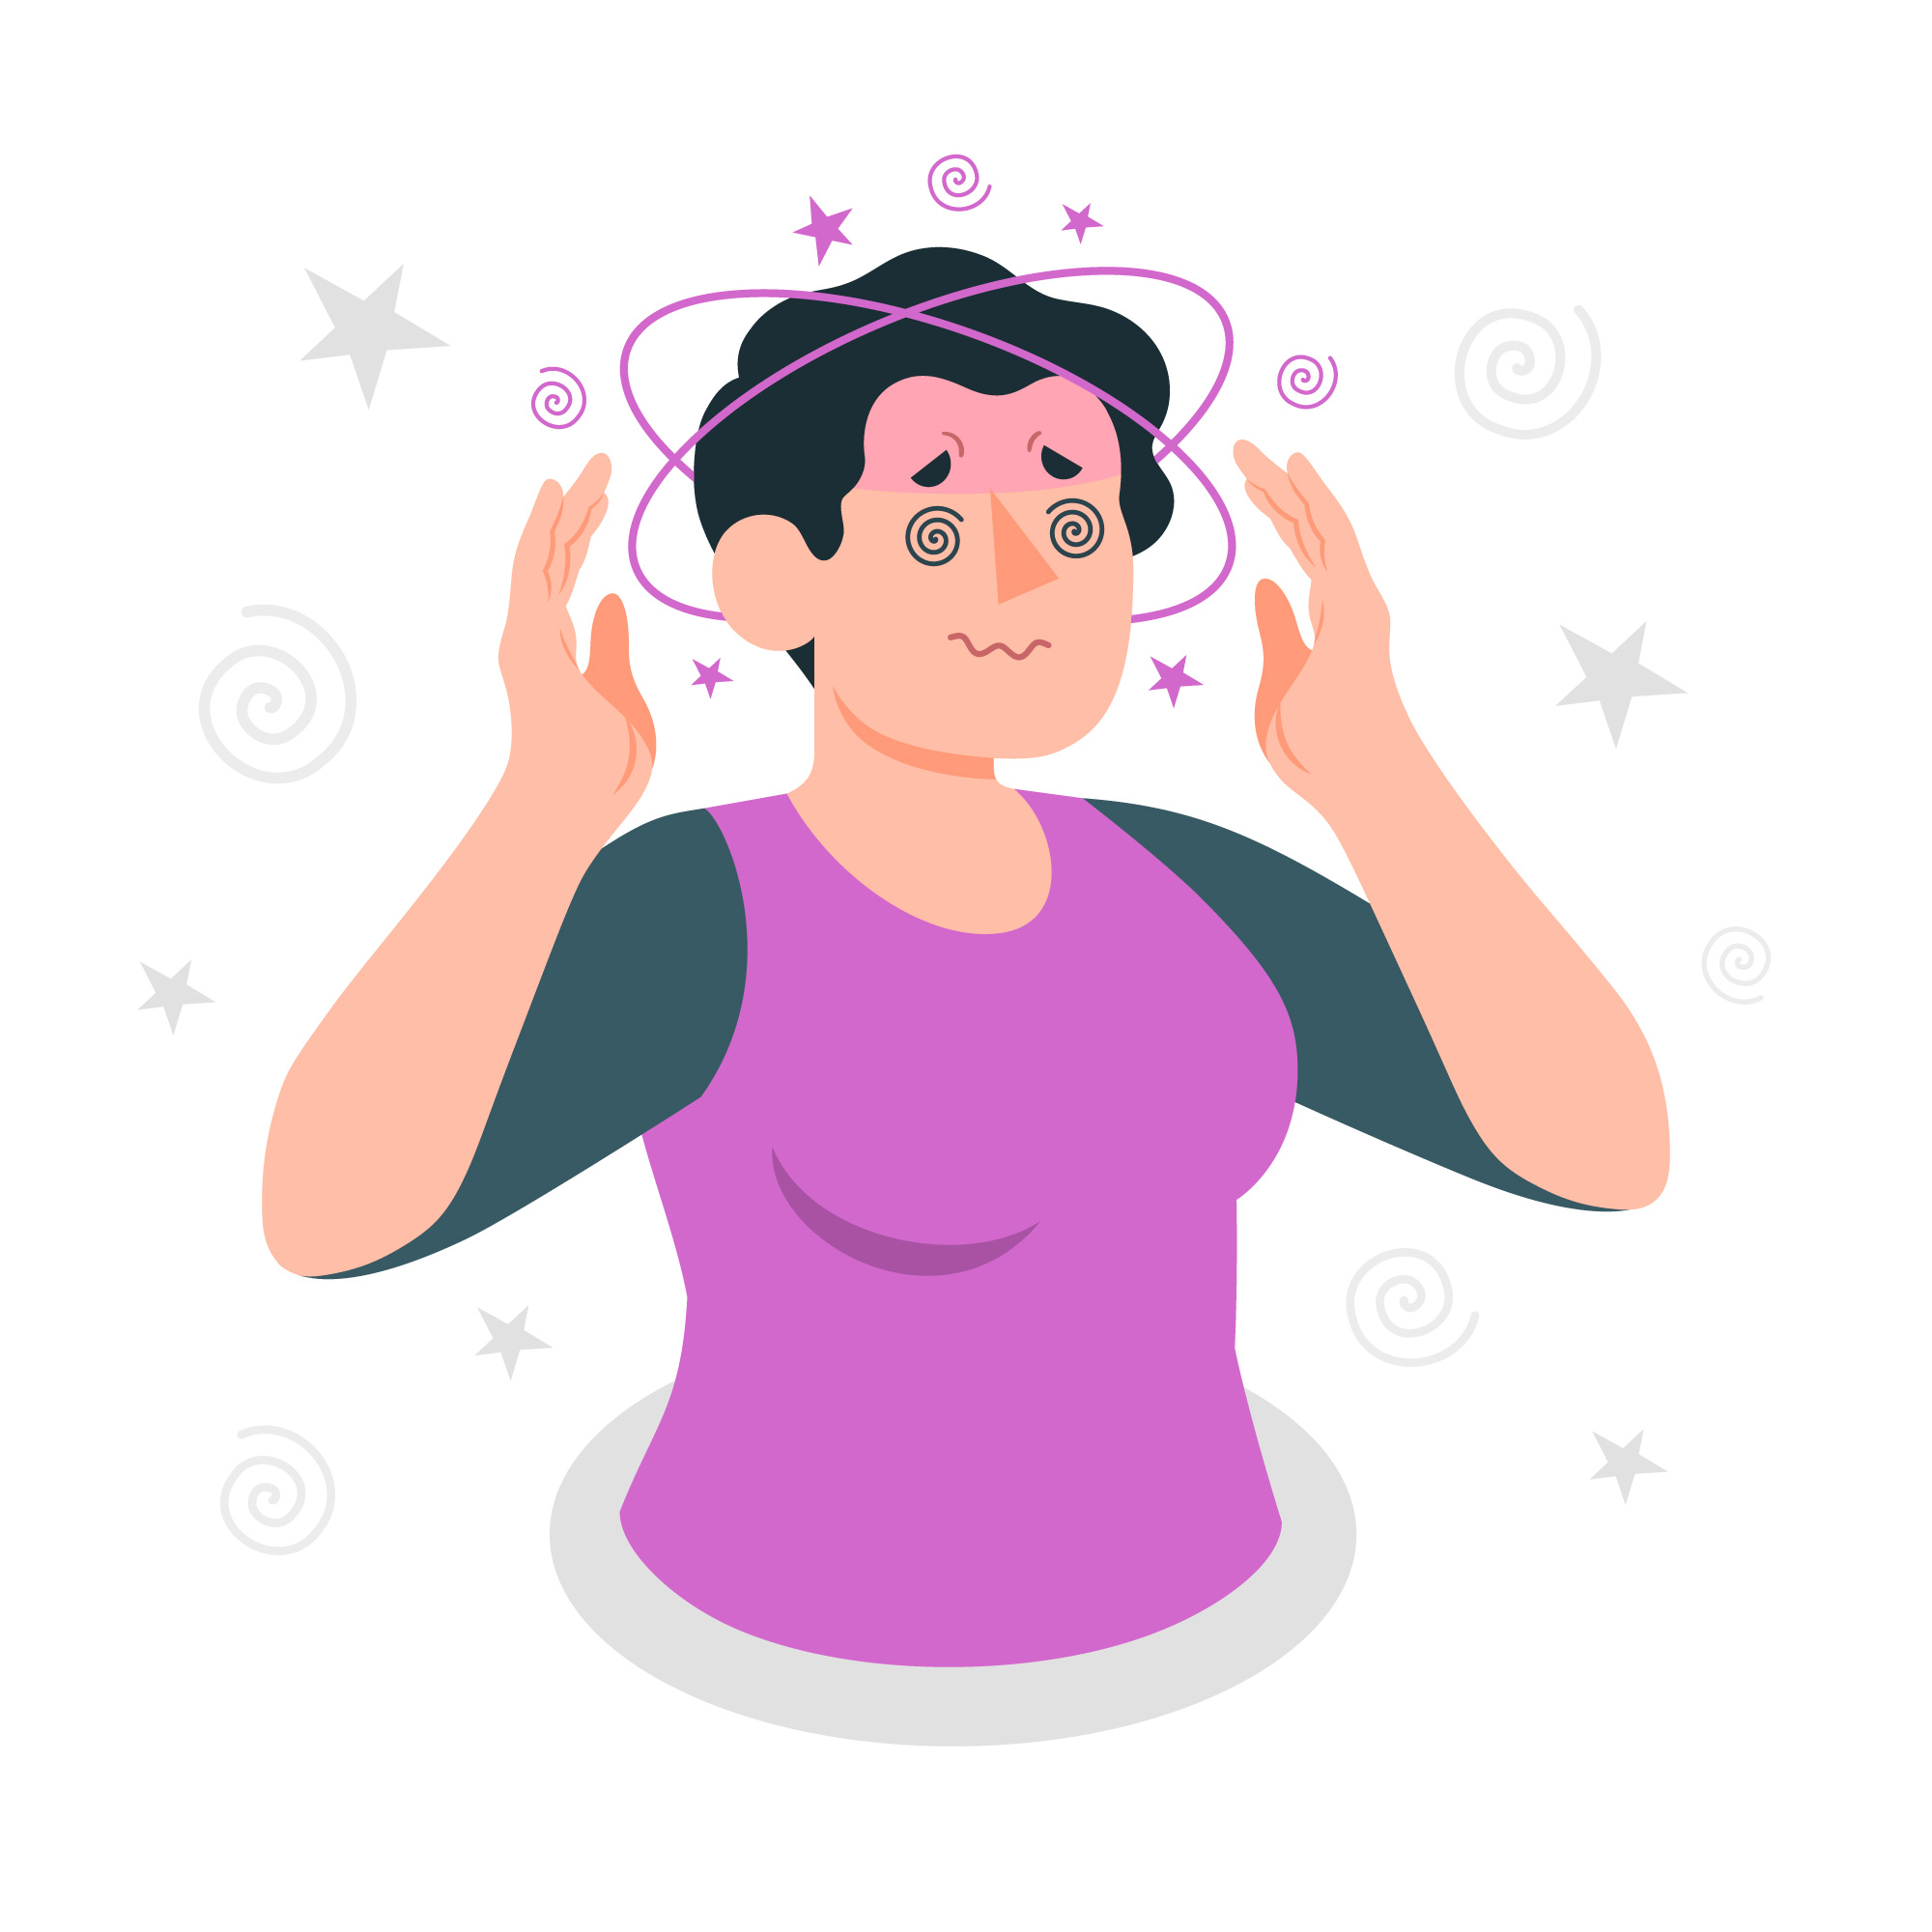 Illustration of a woman who feels her head spinning